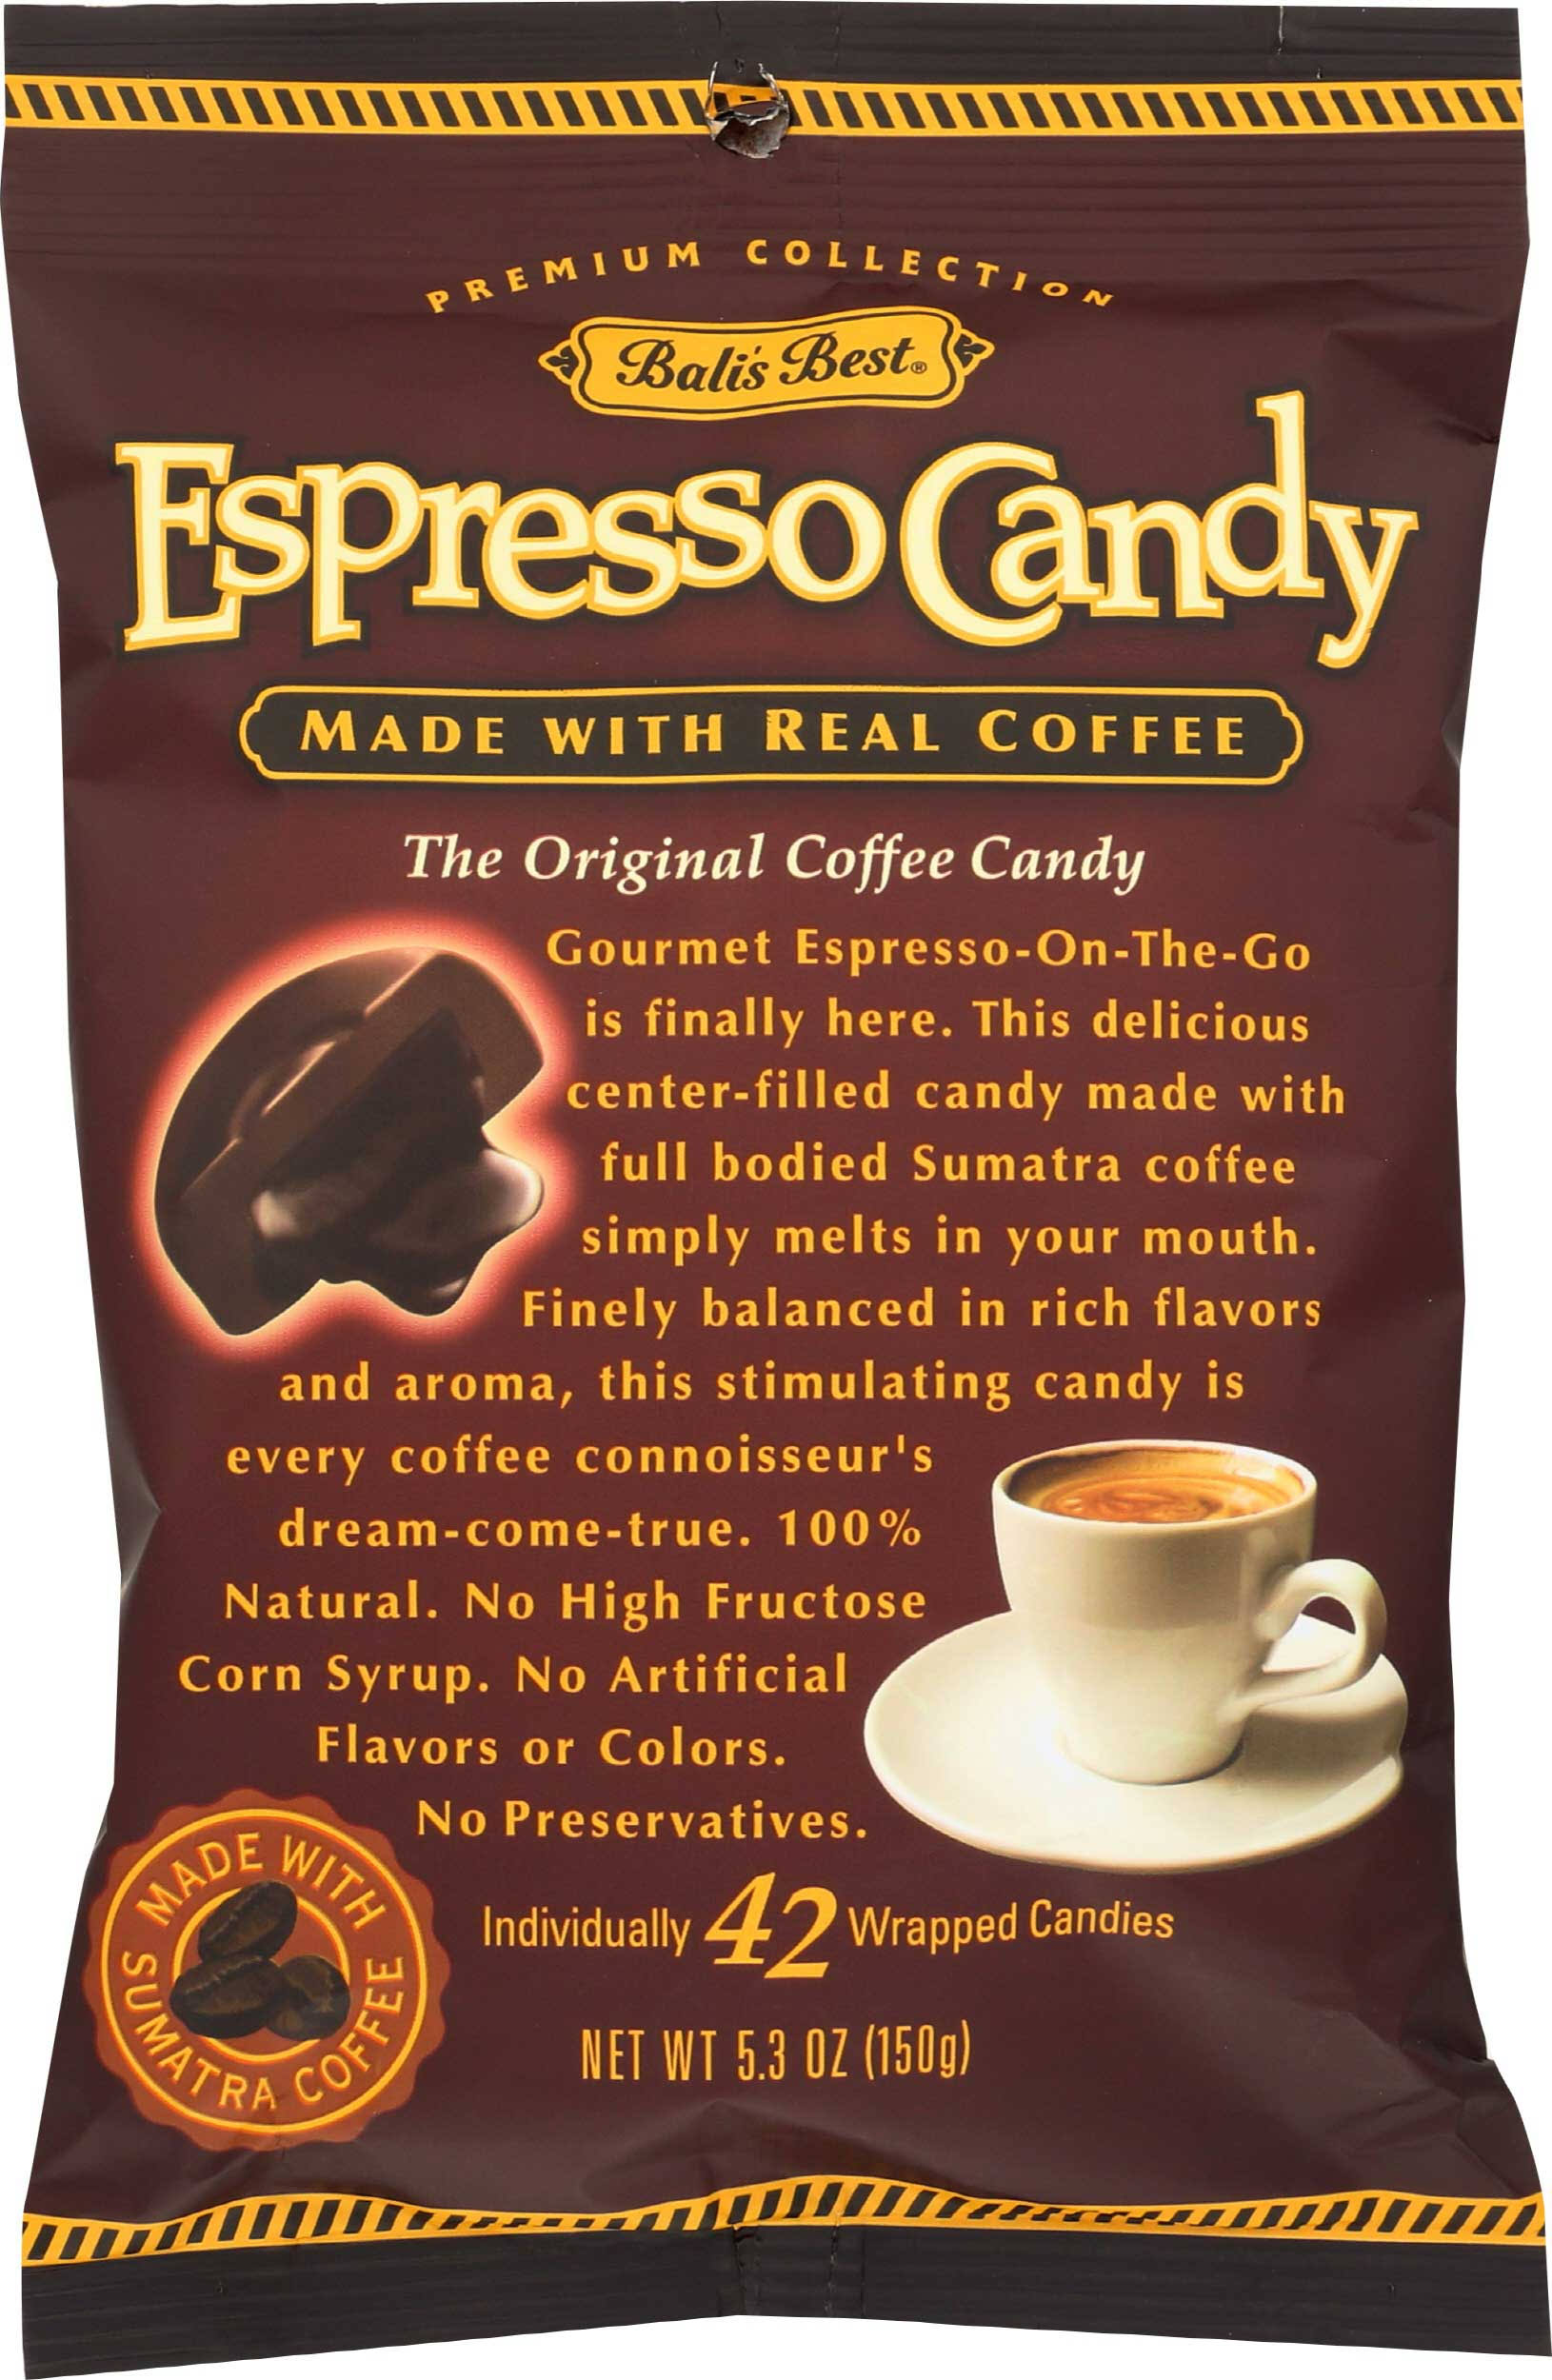 Bali's Best Espresso Coffee and Late Candy - 2lbs